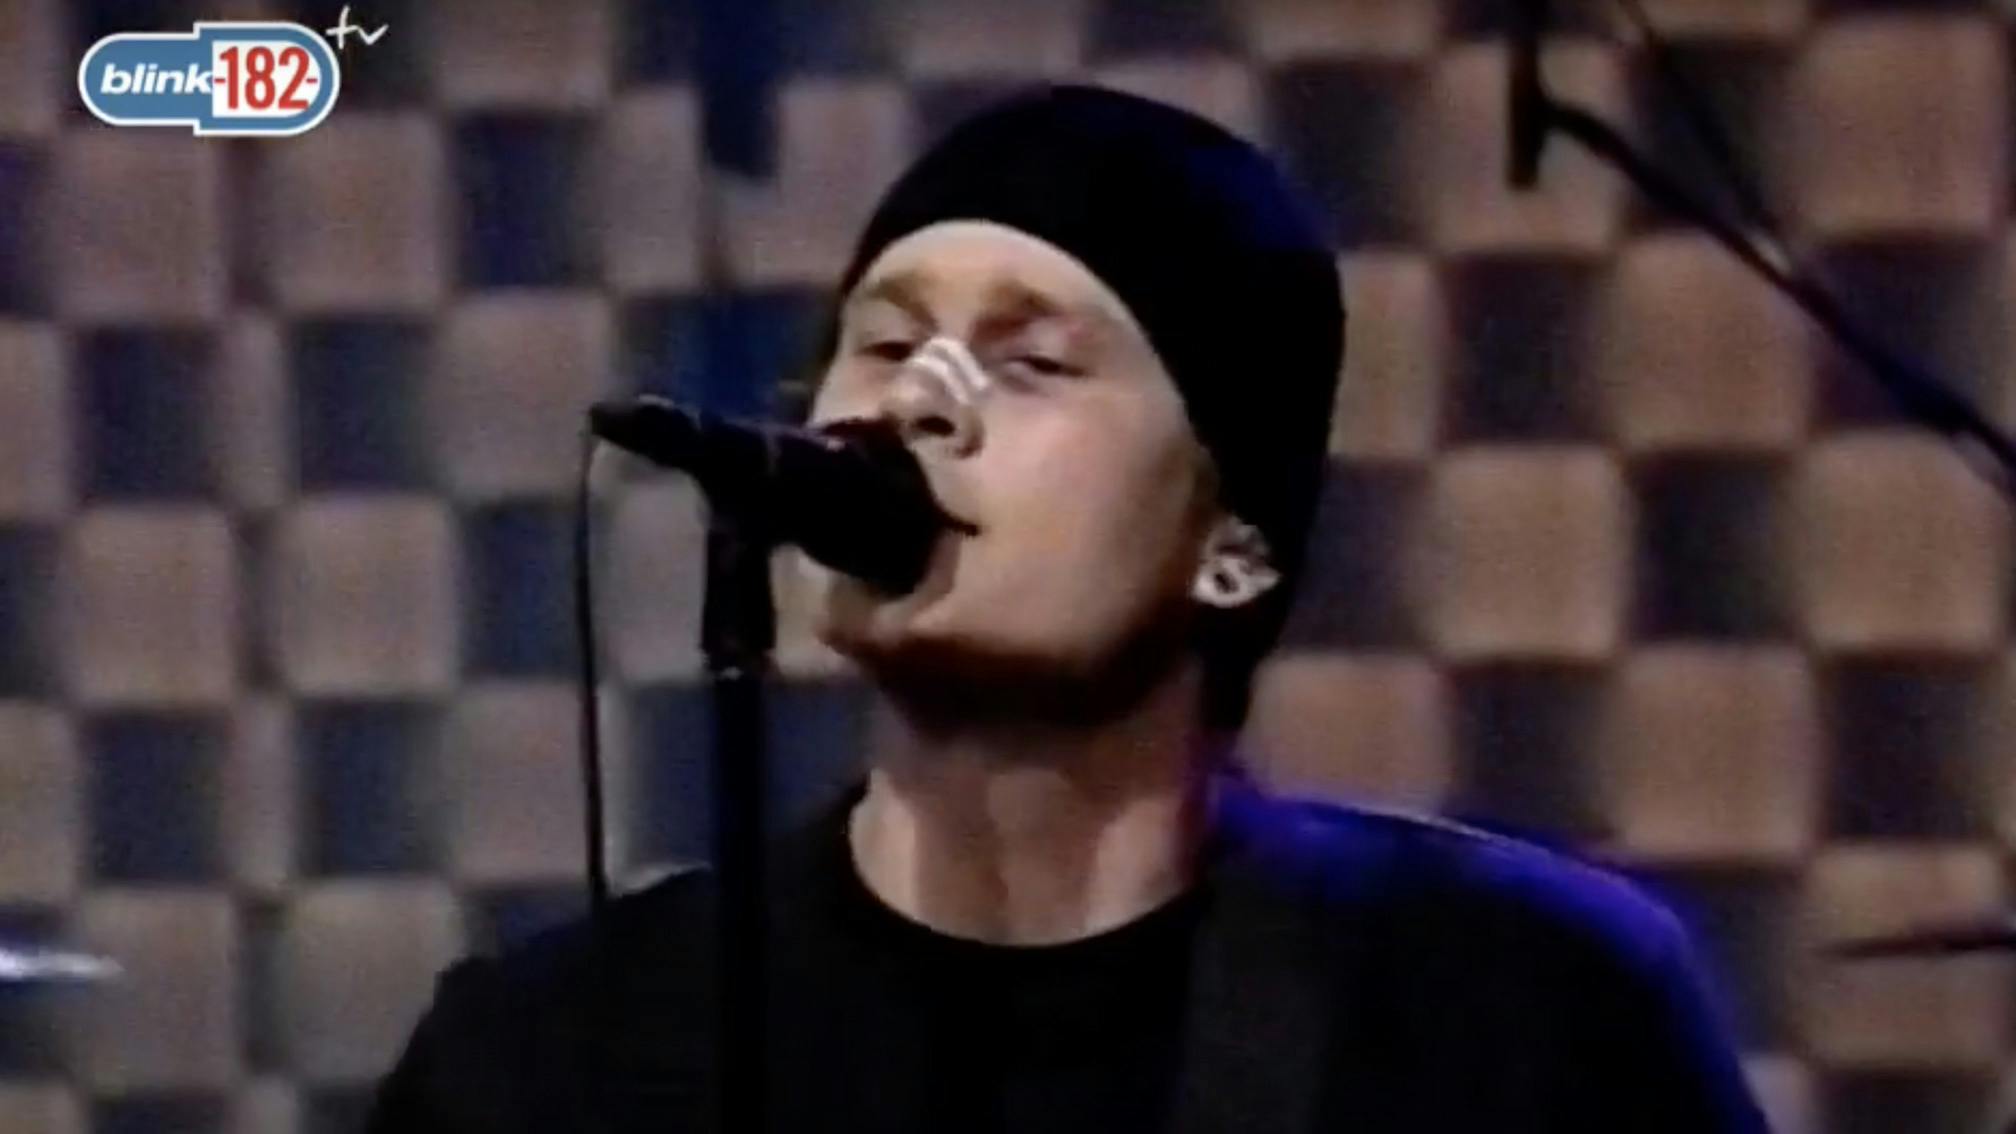 That Time blink-182 Played Conan O'Brien Looking Beaten-Up